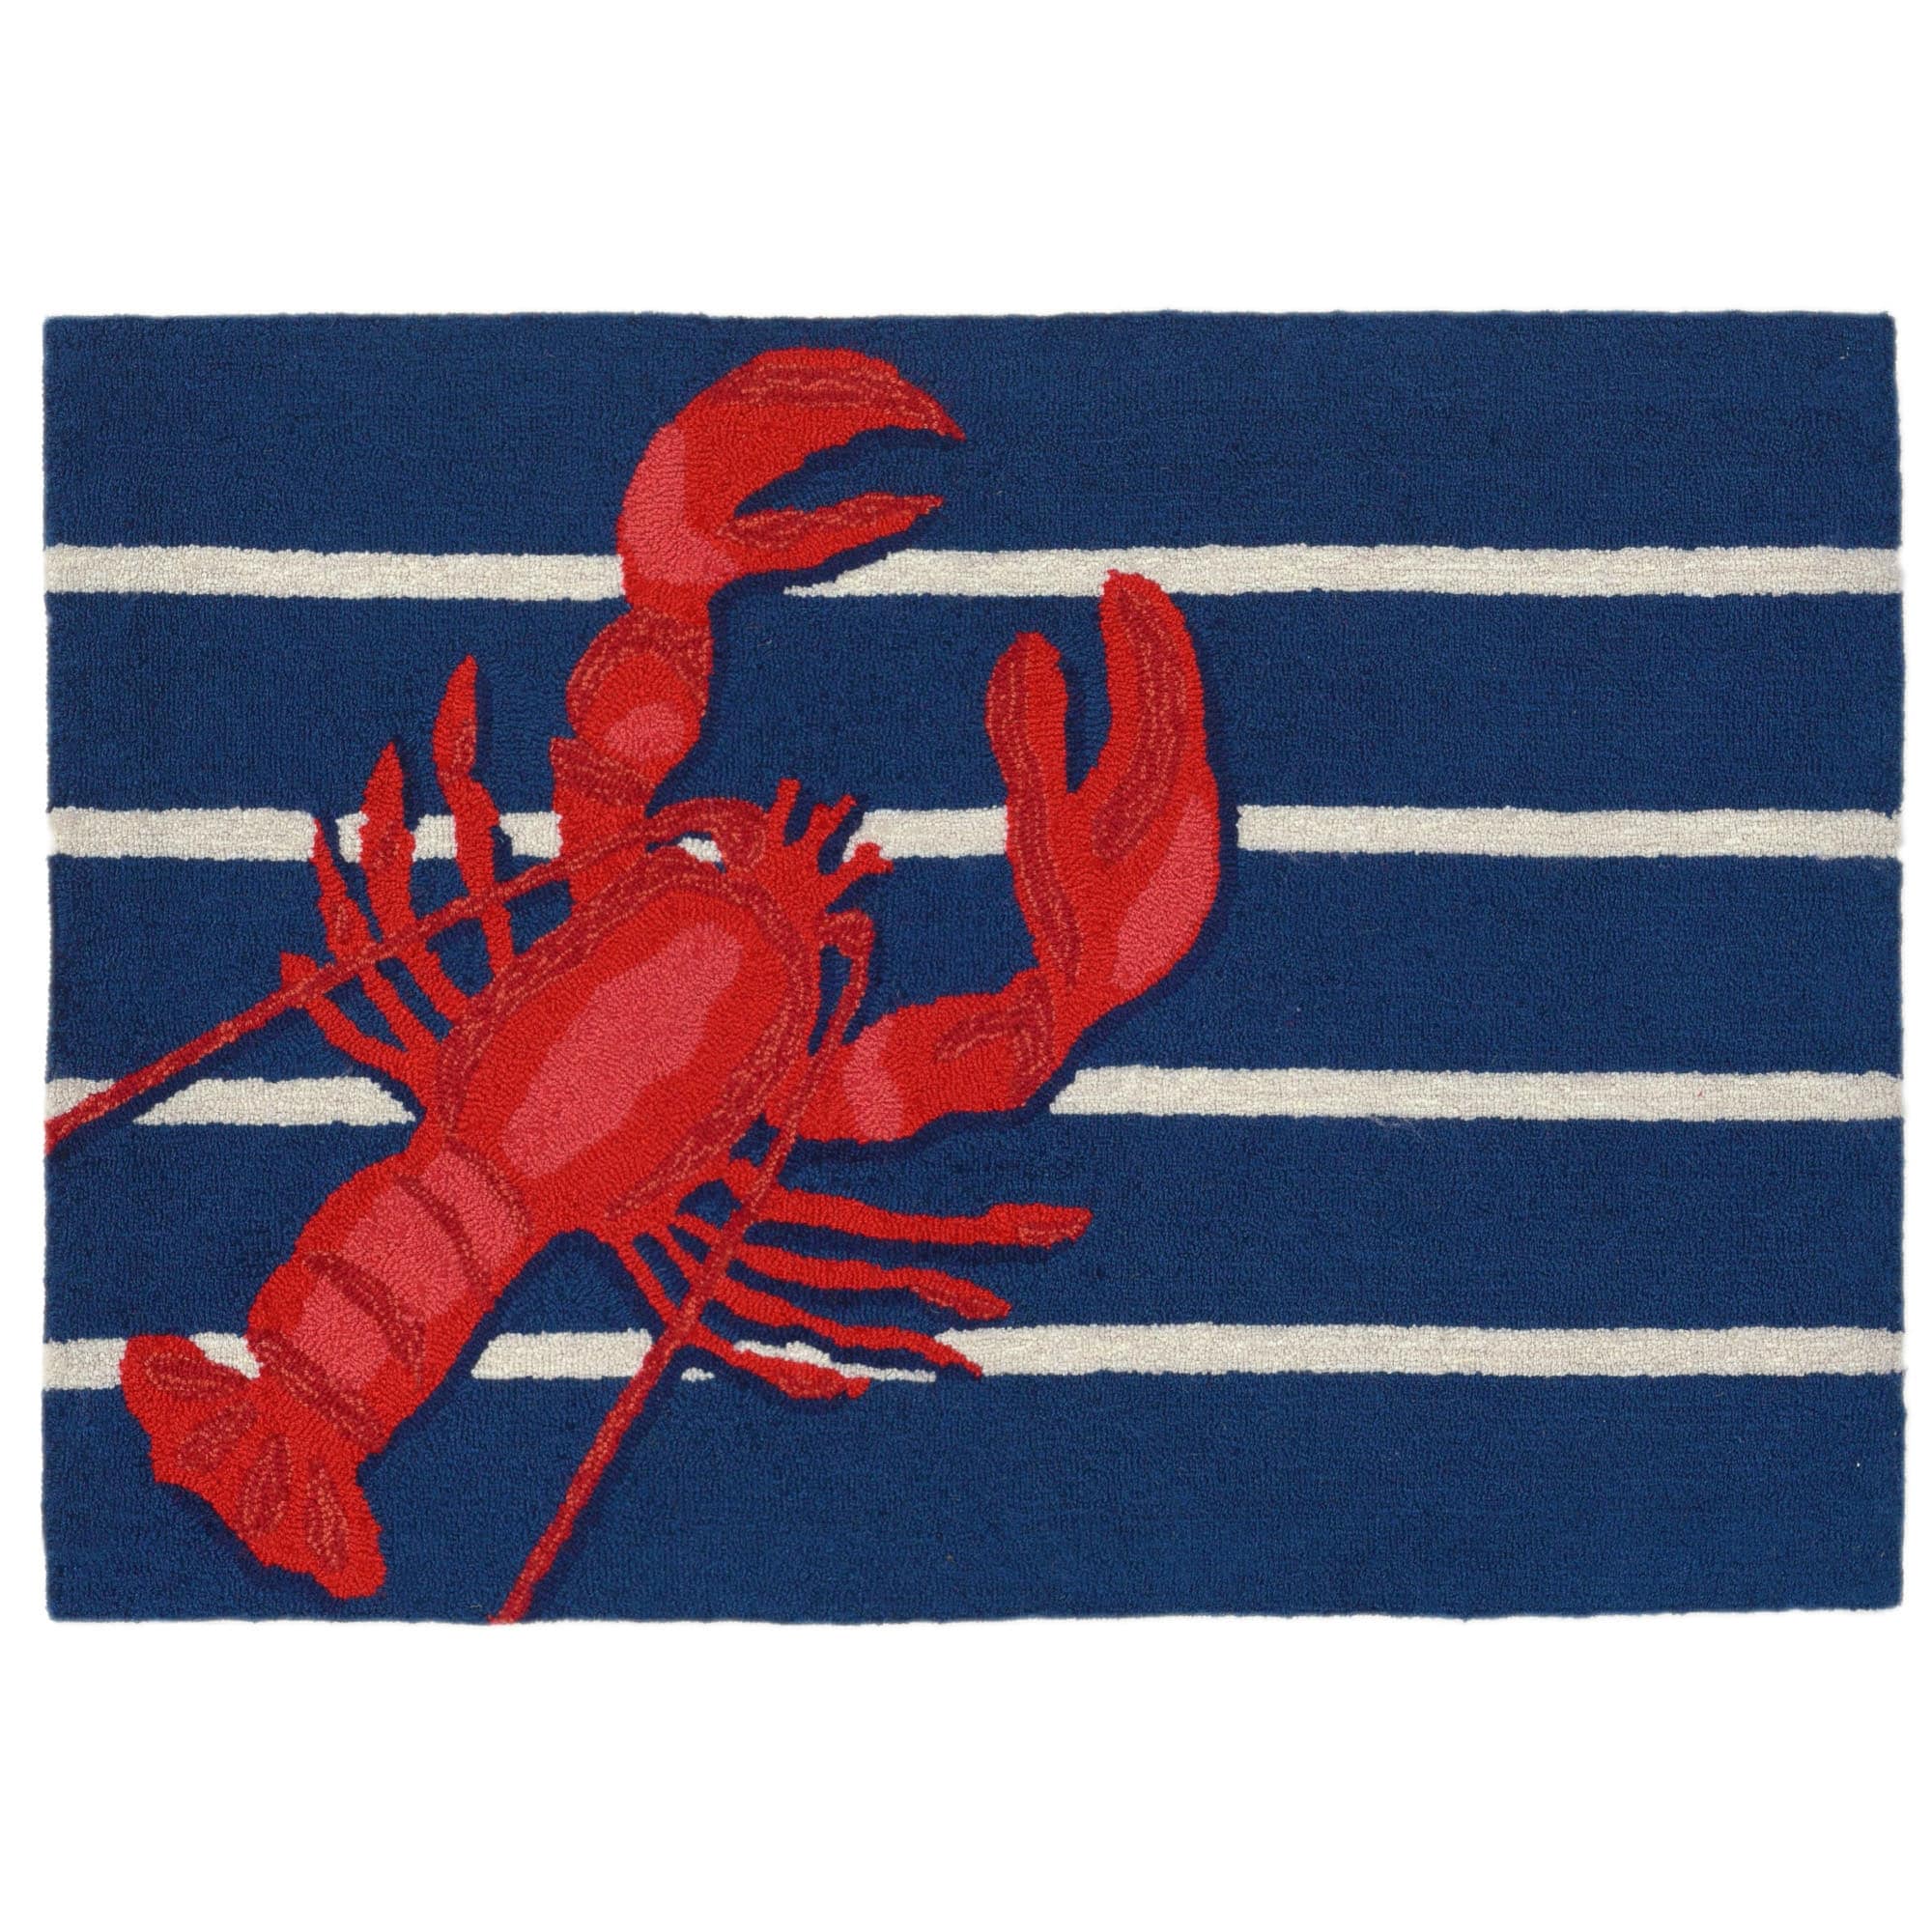 https://ak1.ostkcdn.com/images/products/is/images/direct/1a9f46b206ebaace40fed16b95648073ddce7456/Liora-Manne-Frontporch-Lobster-on-Stripes-Indoor-Outdoor-Rug.jpg